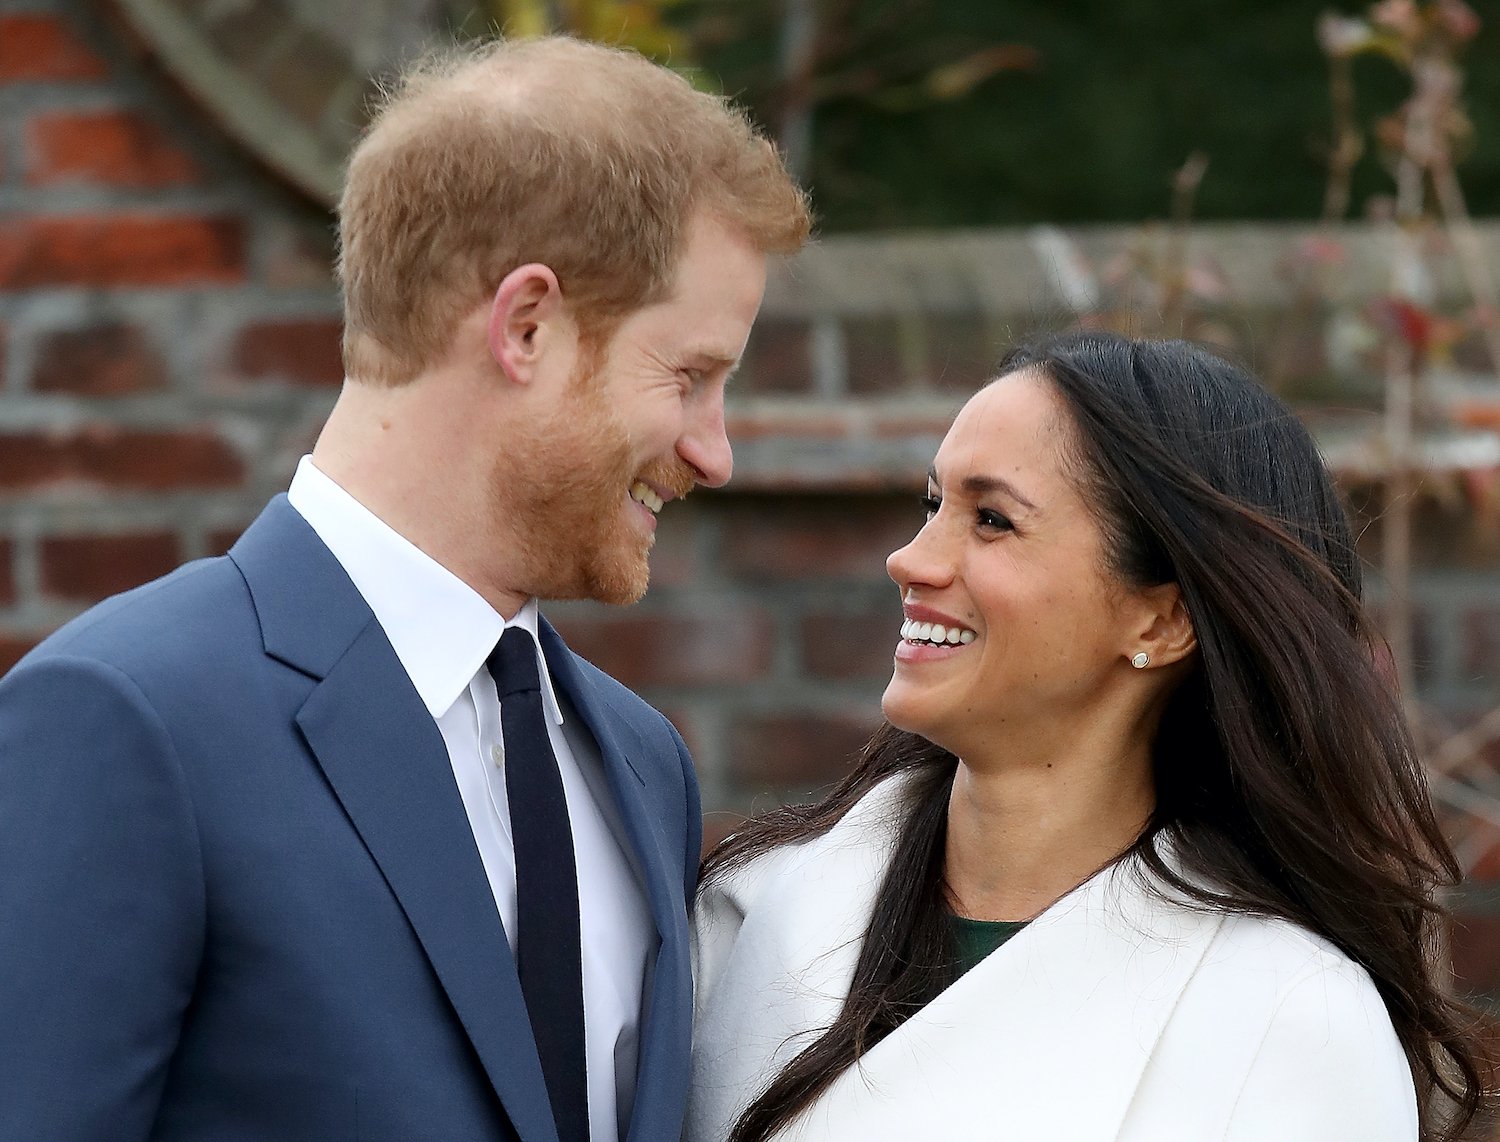 Prince Harry and Meghan Markle during an official photocall to announce their engagement at The Sunken Gardens at Kensington Palace in 2017